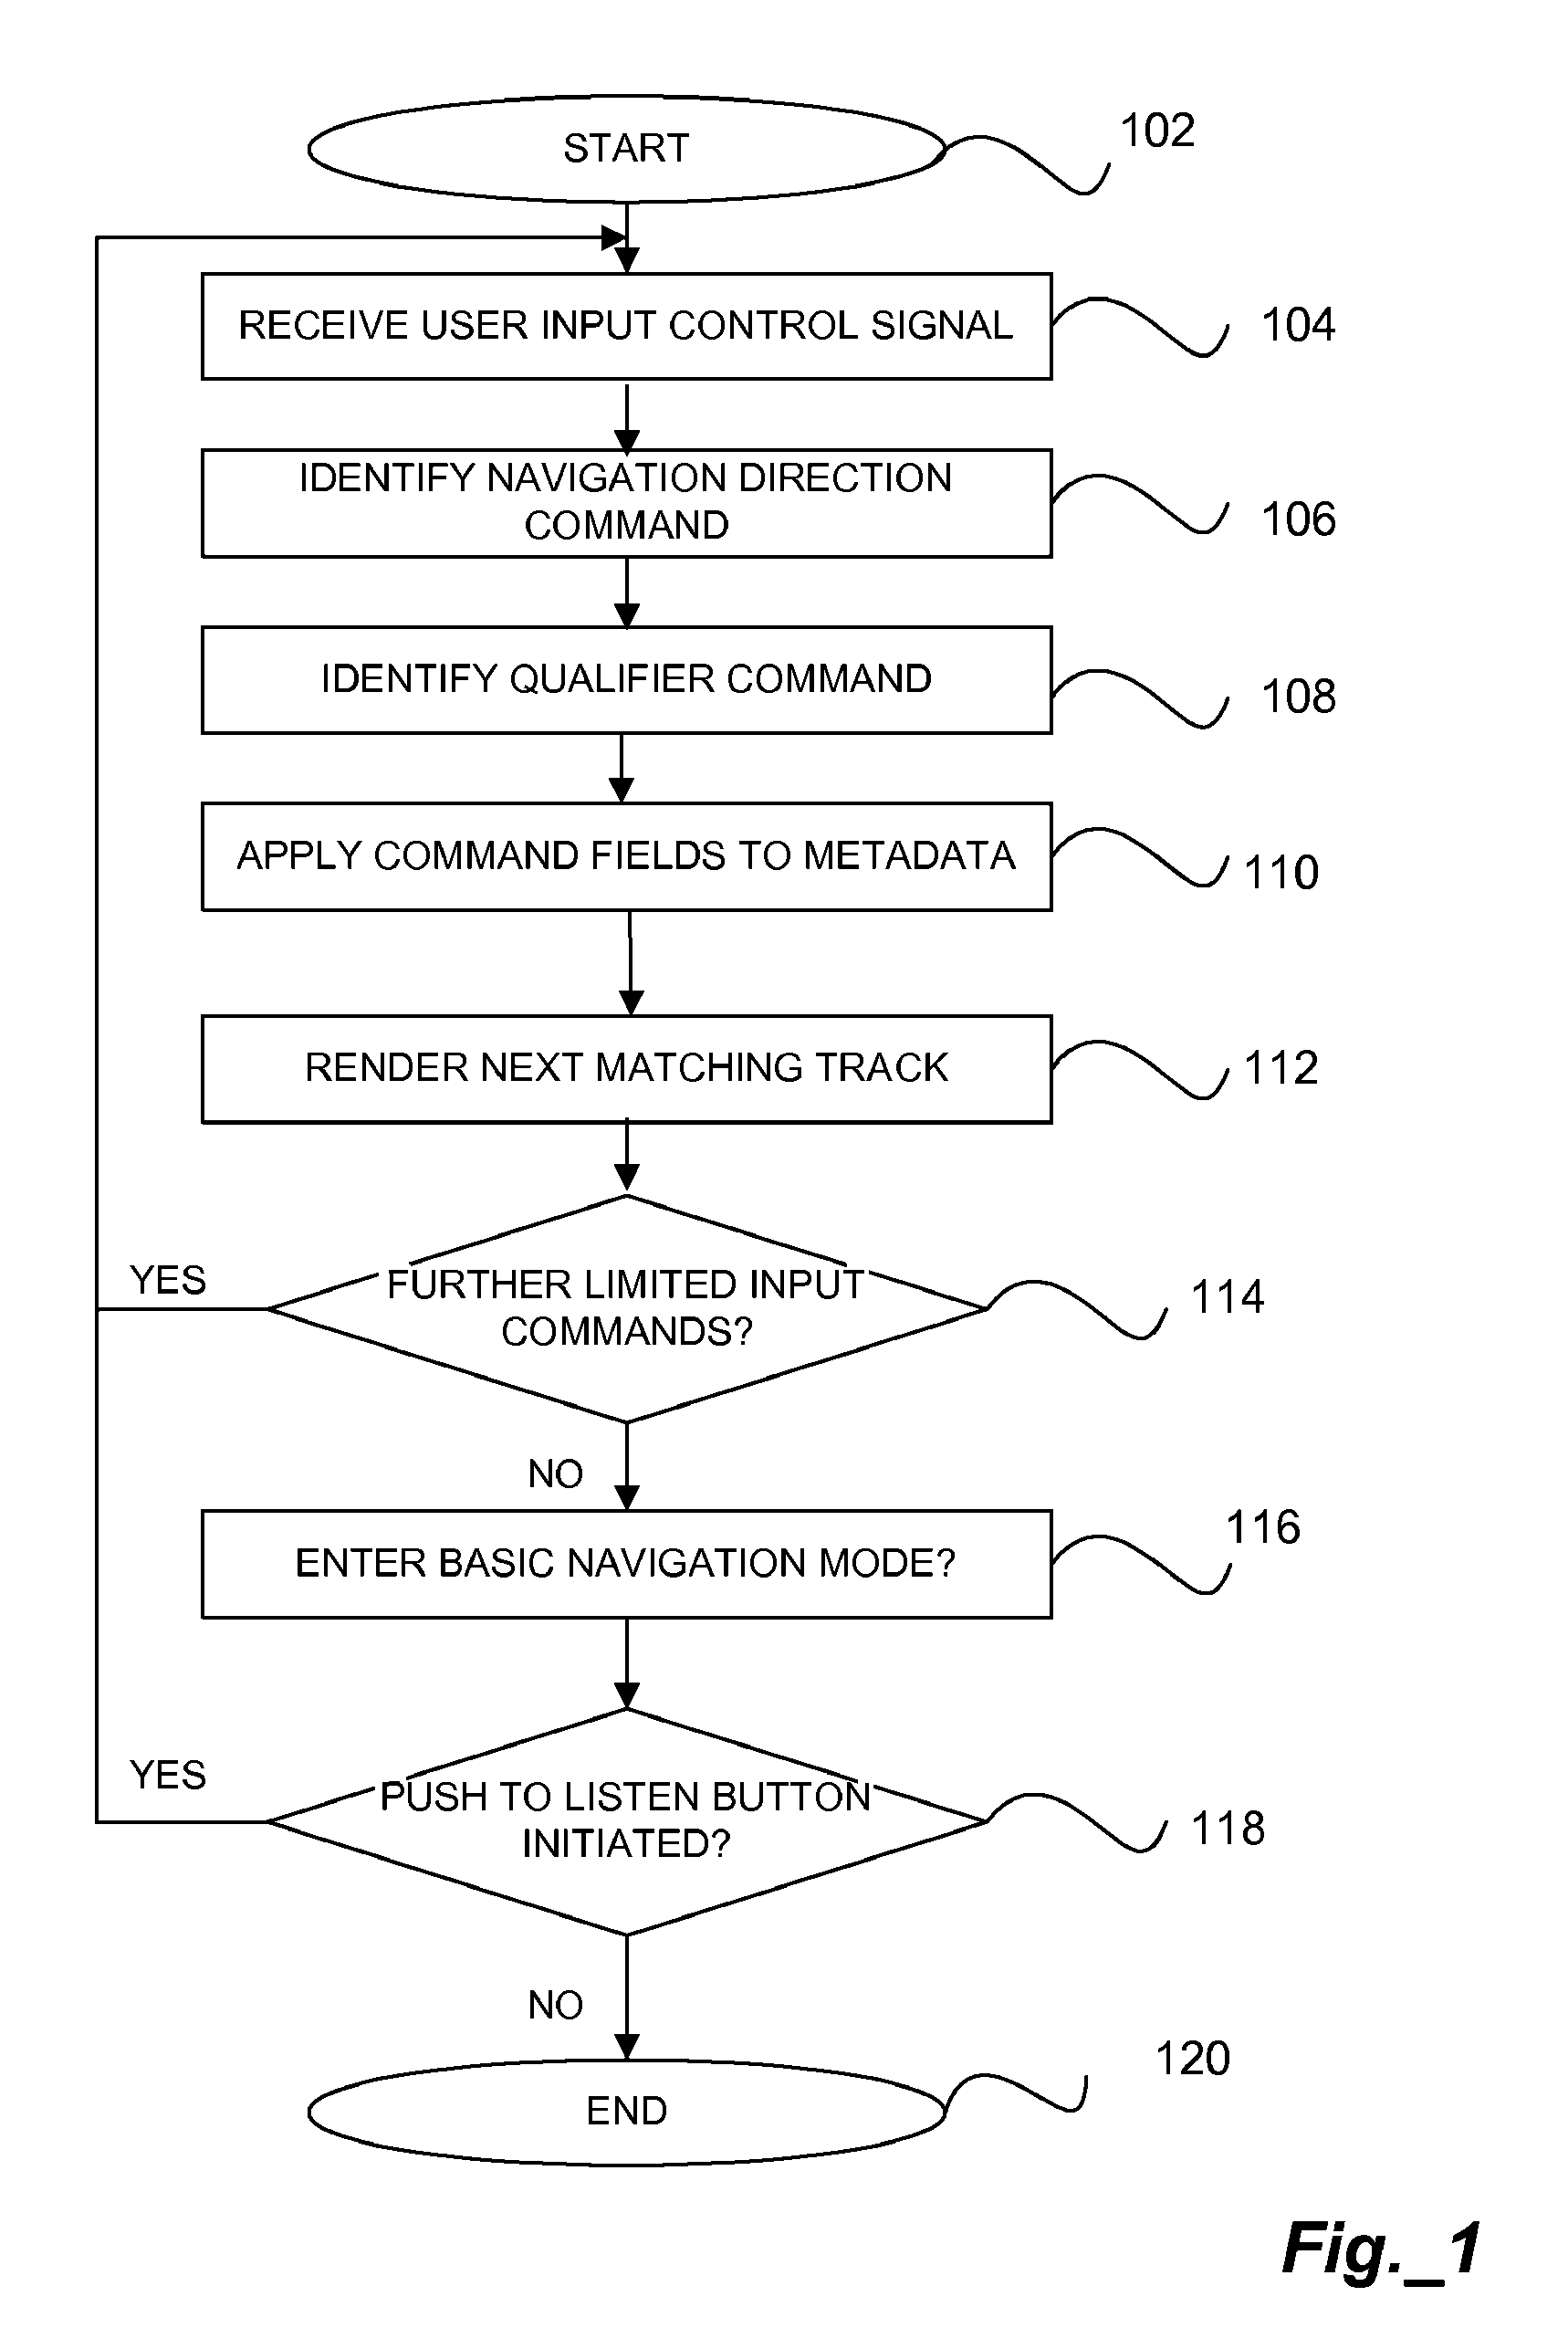 System and method for modifying media content playback based on limited input